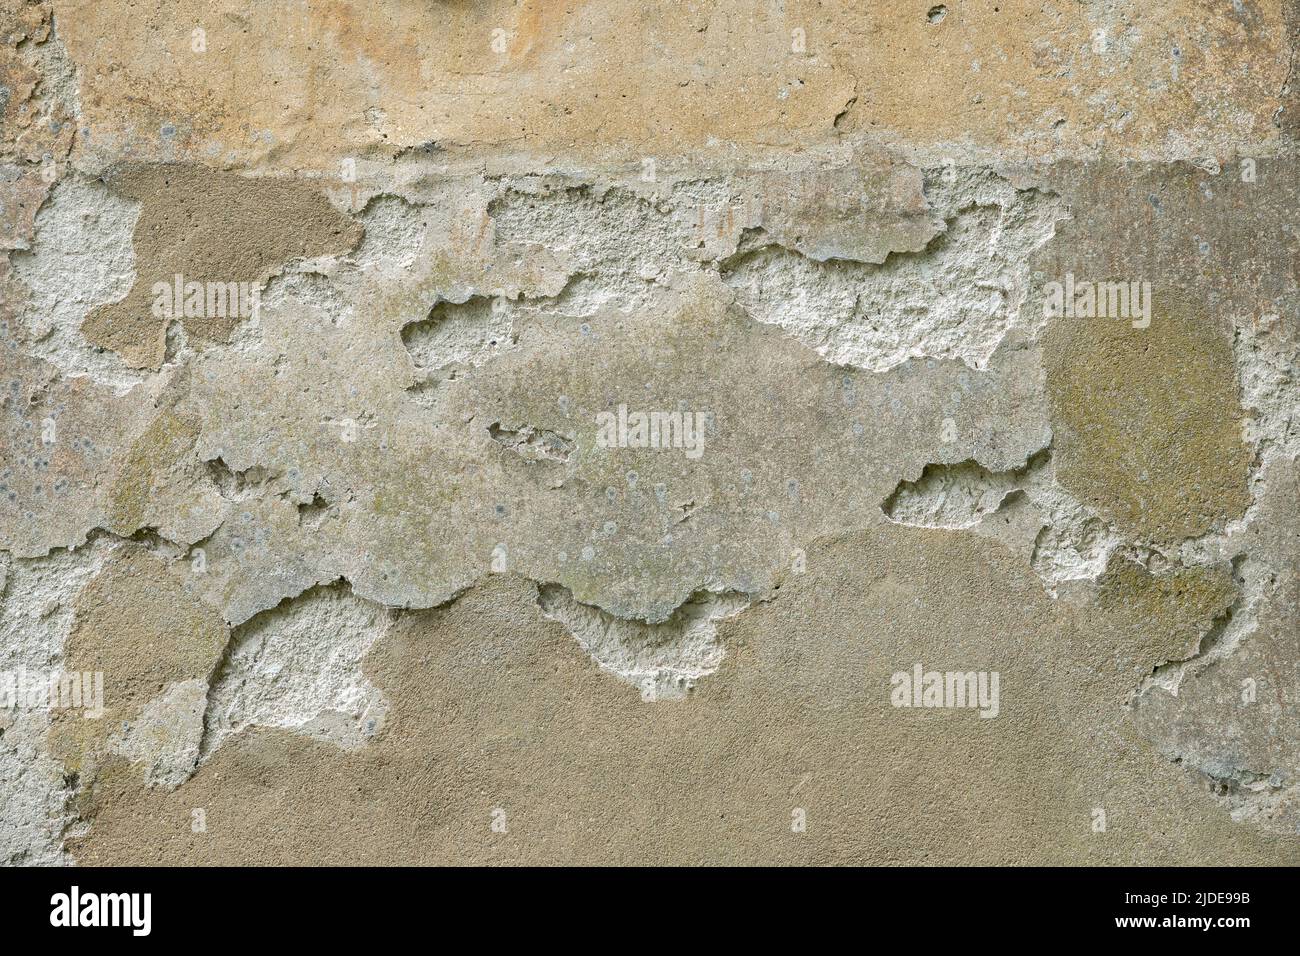 Small area of heavily flaking plaster on a stone wall Stock Photo